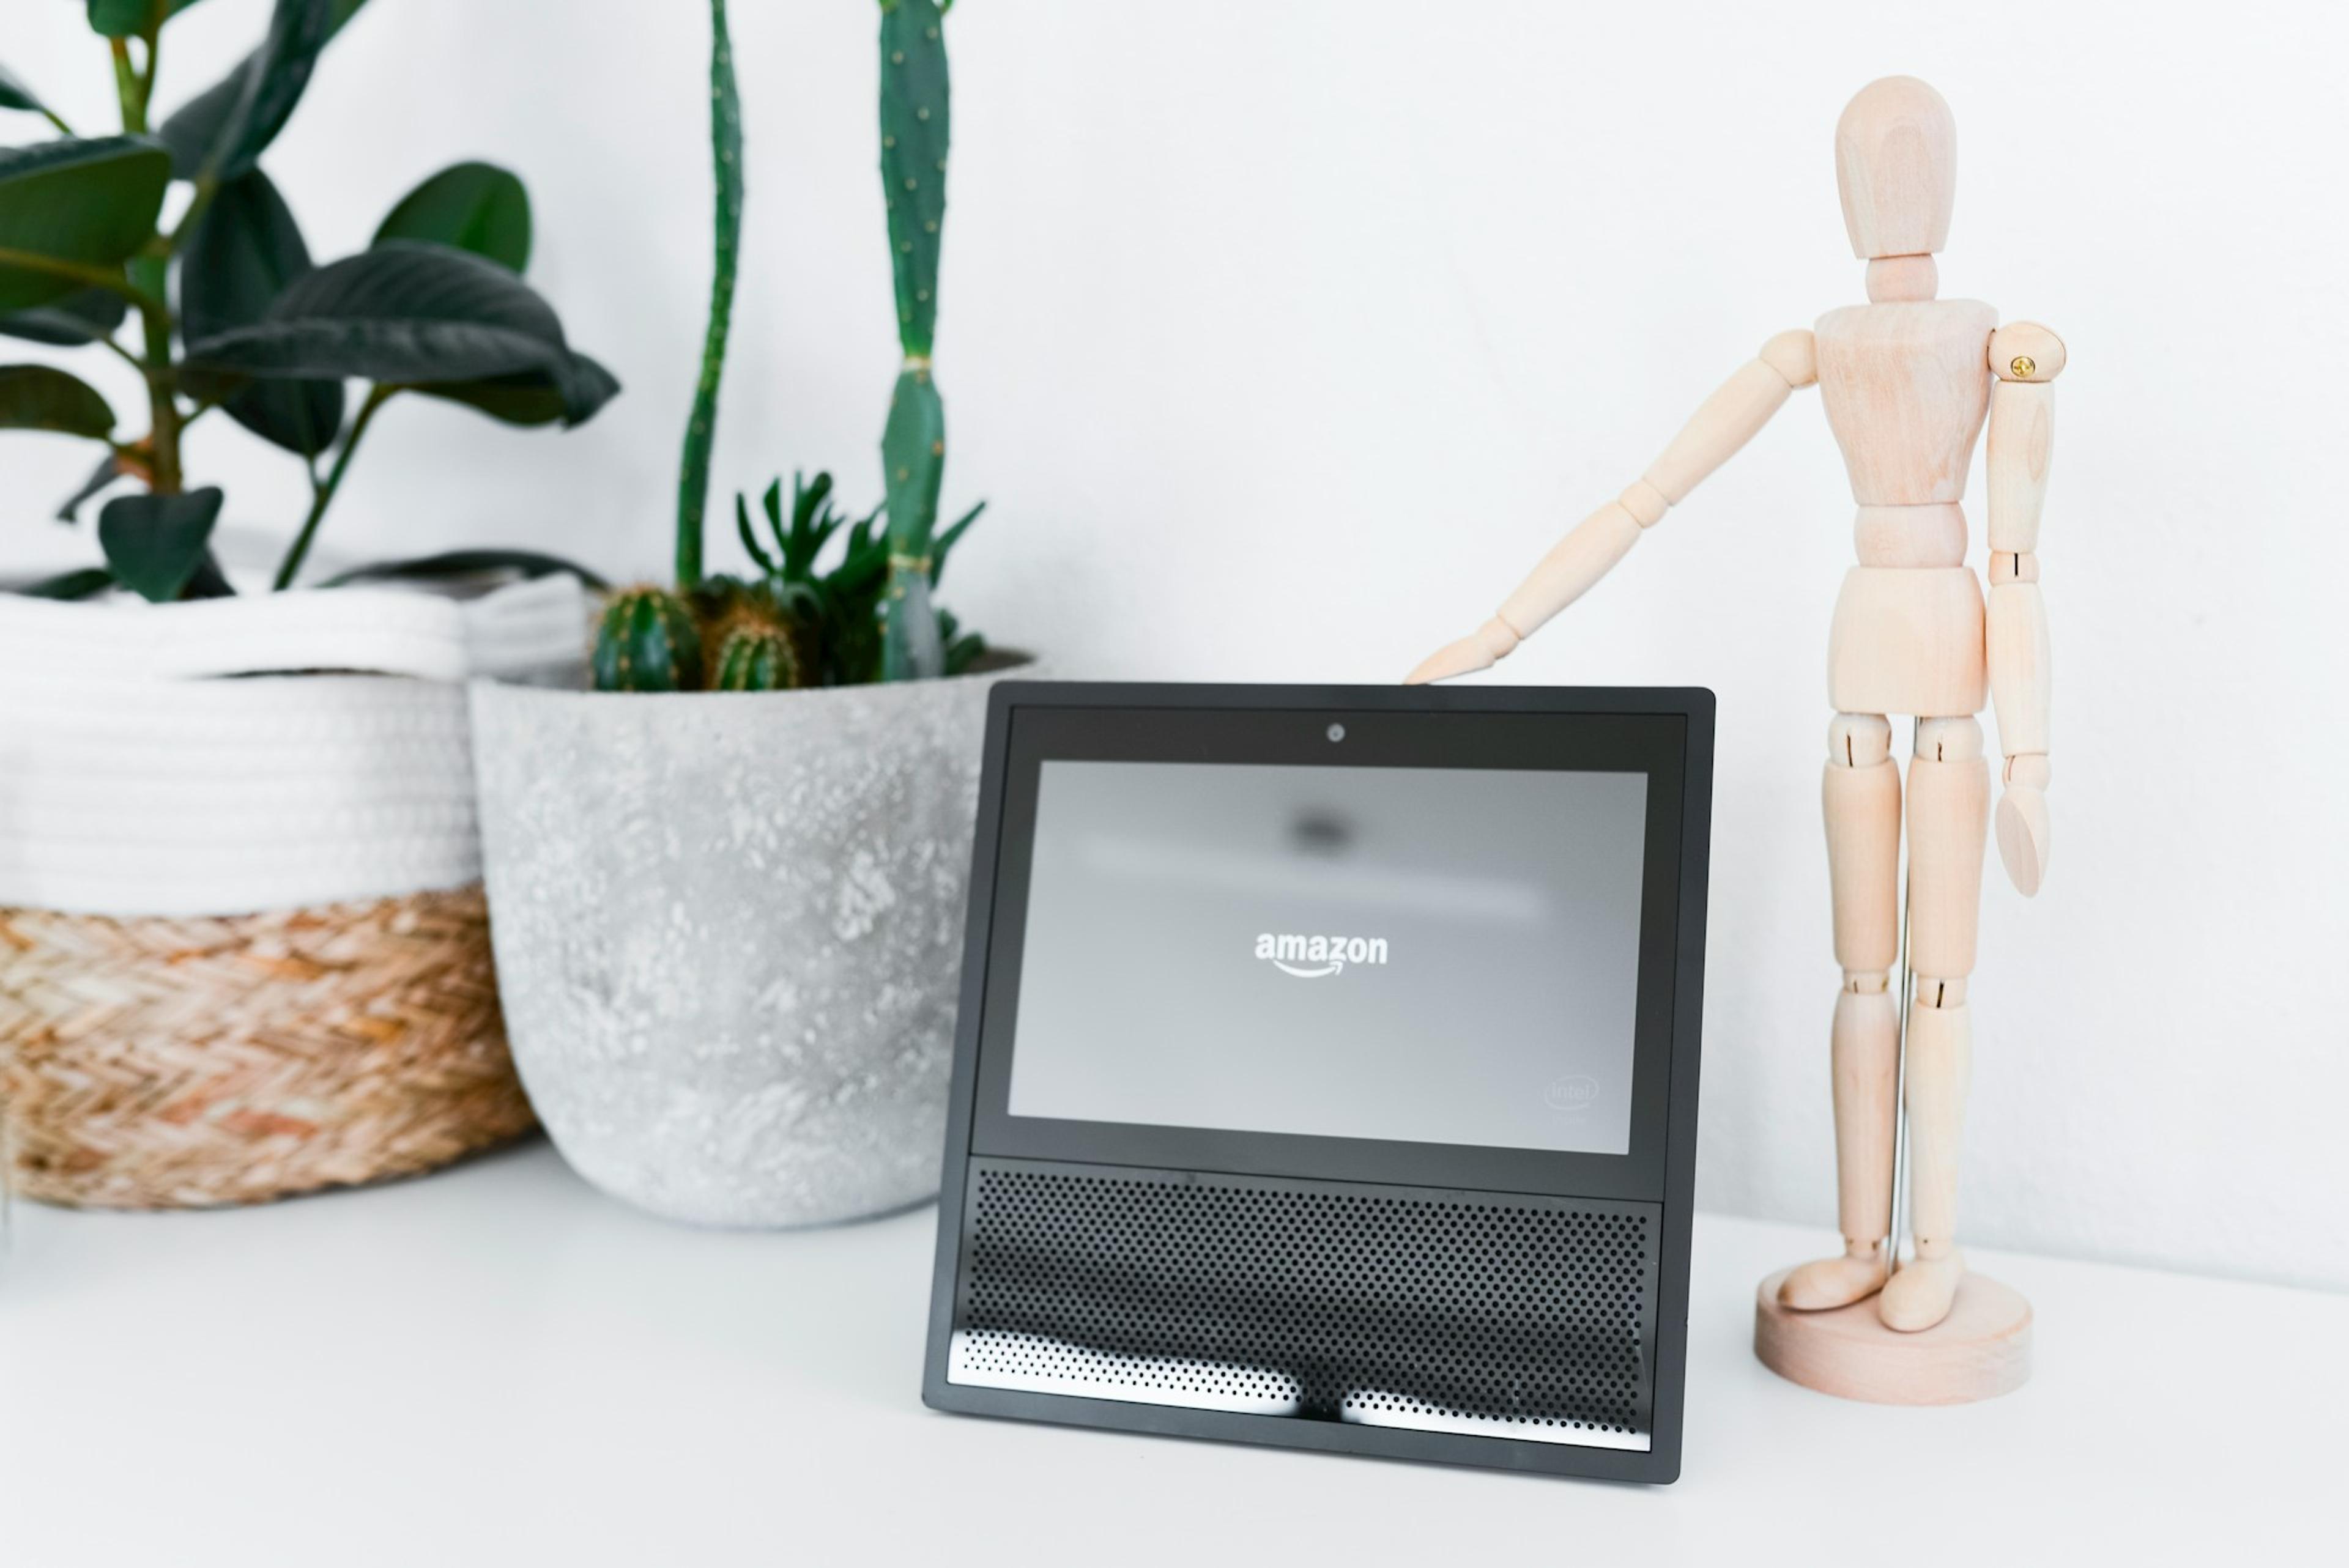 Image of a doll pointing at an Amazon branded speaker gadget on a shelf